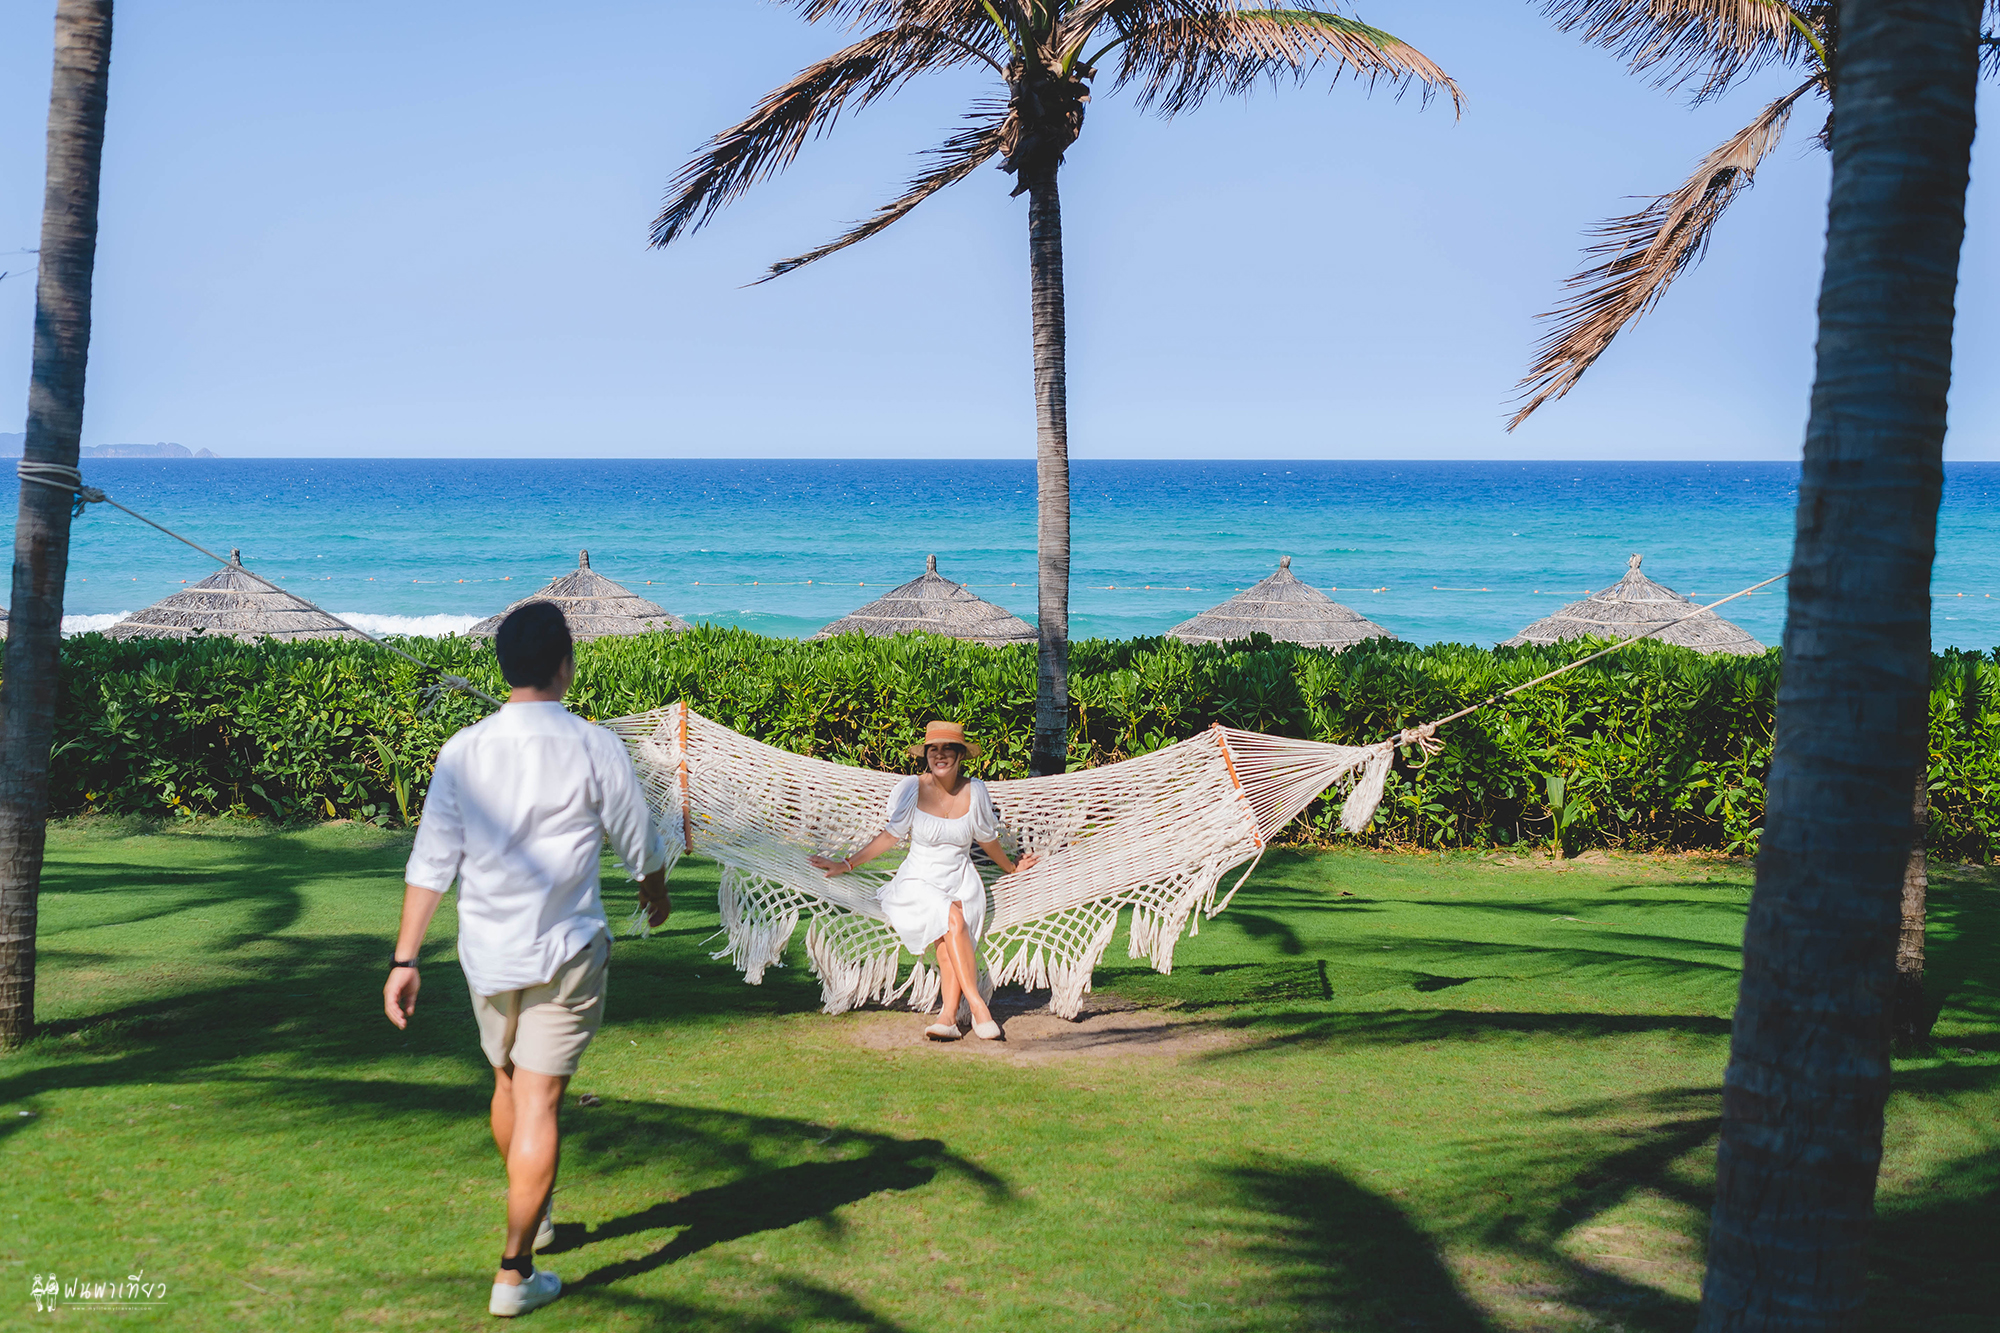 Couple hanging out in the tropical garden by the beach at Tropicana Beach Club of Movenpick Resort Cam Ranh